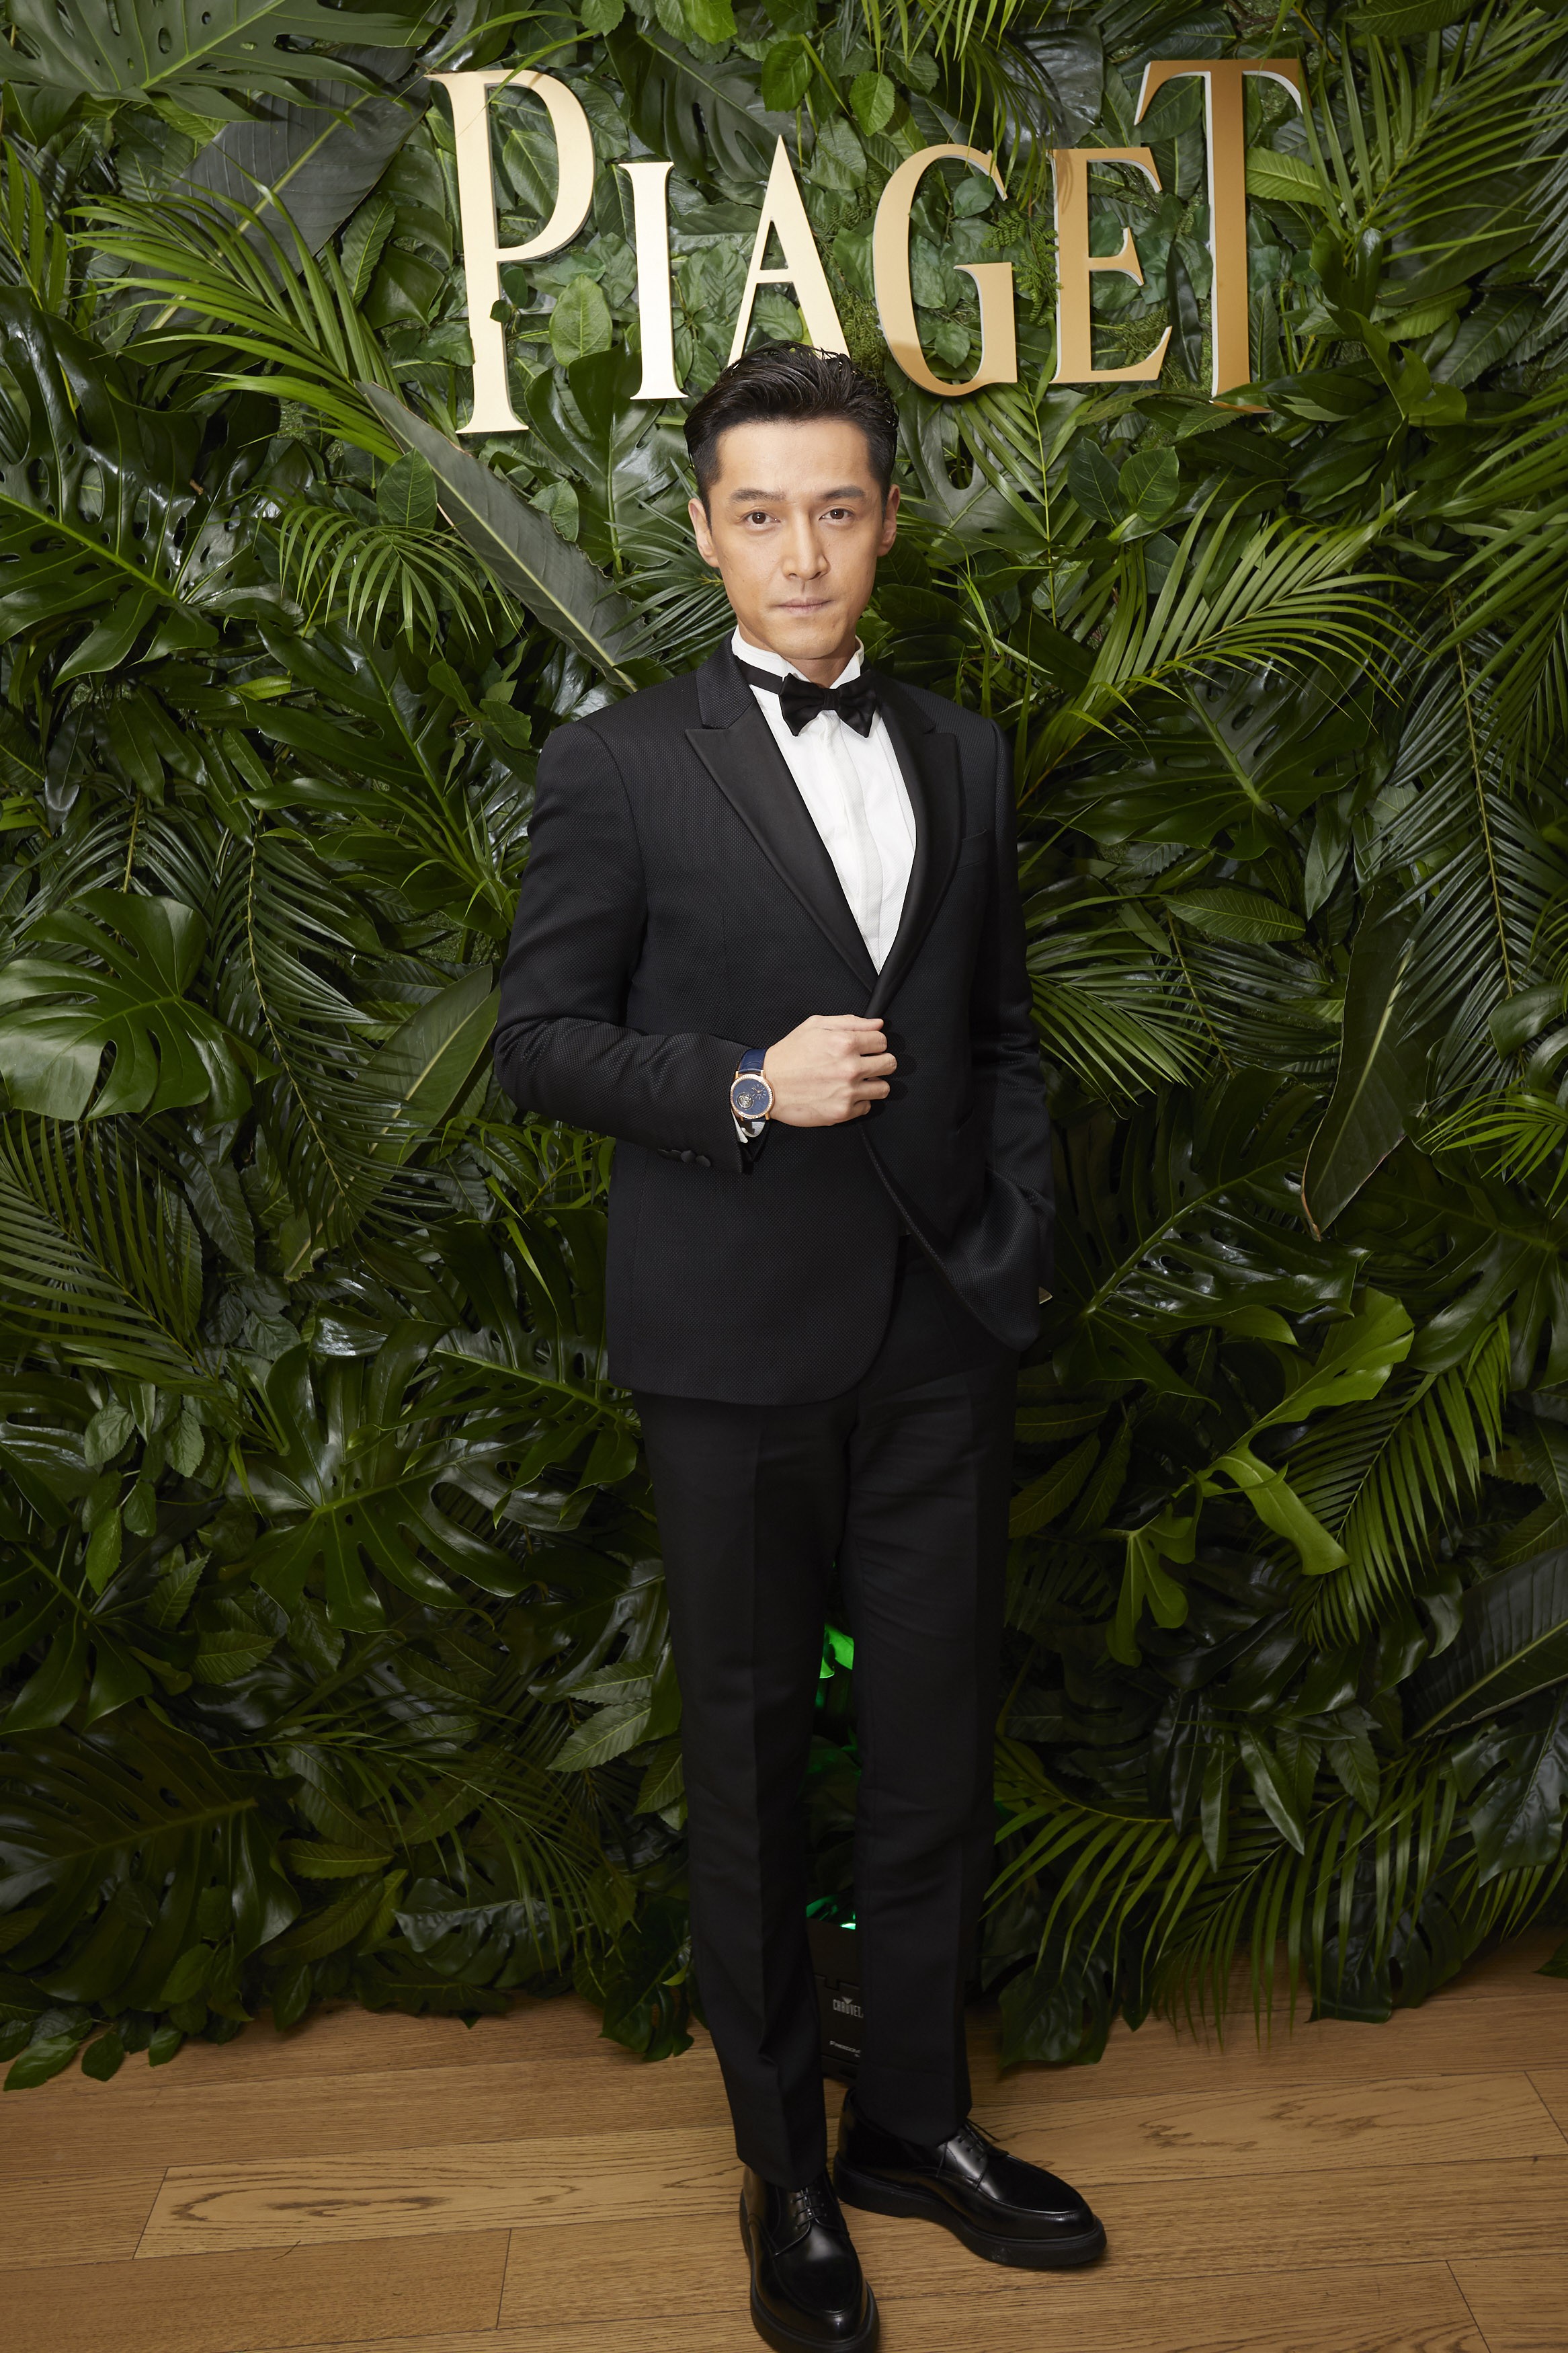 Chinese actor Hu Ge has been collaborating closely with Piaget for three to four years, though his association with the brand goes back a decade.